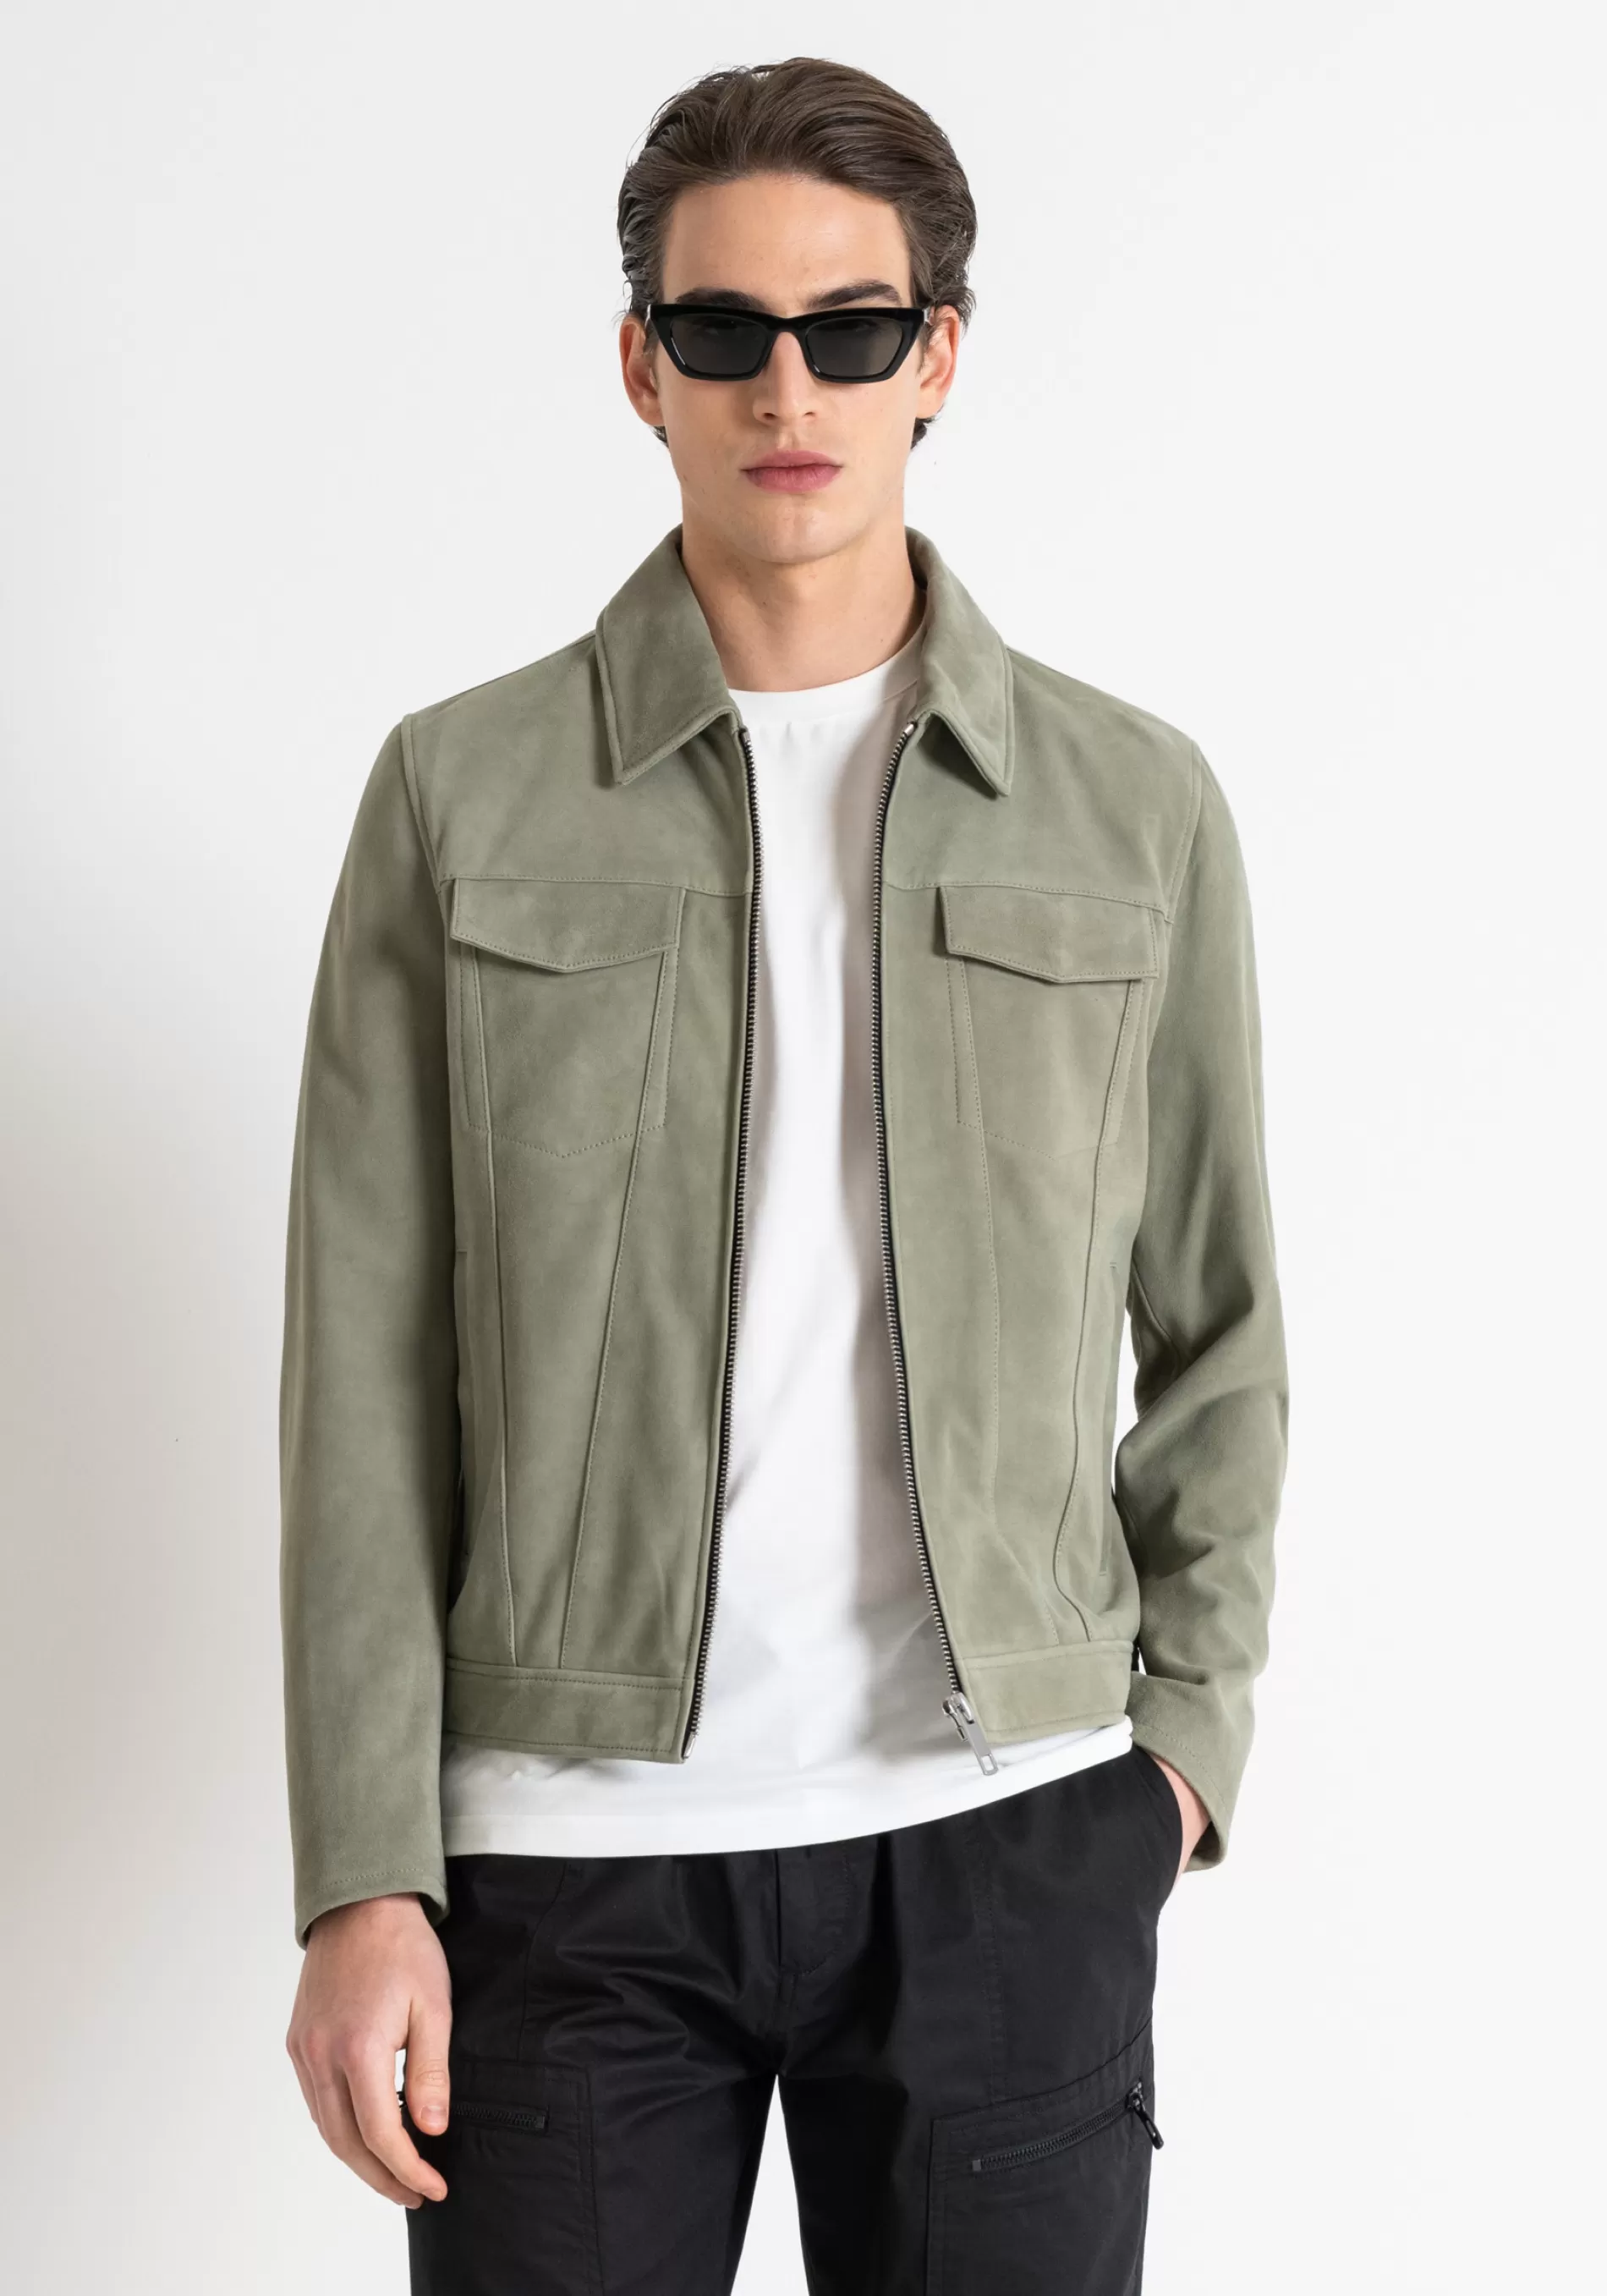 Discount SLIM FIT SUEDE LEATHER JACKET Field Jackets and Coats